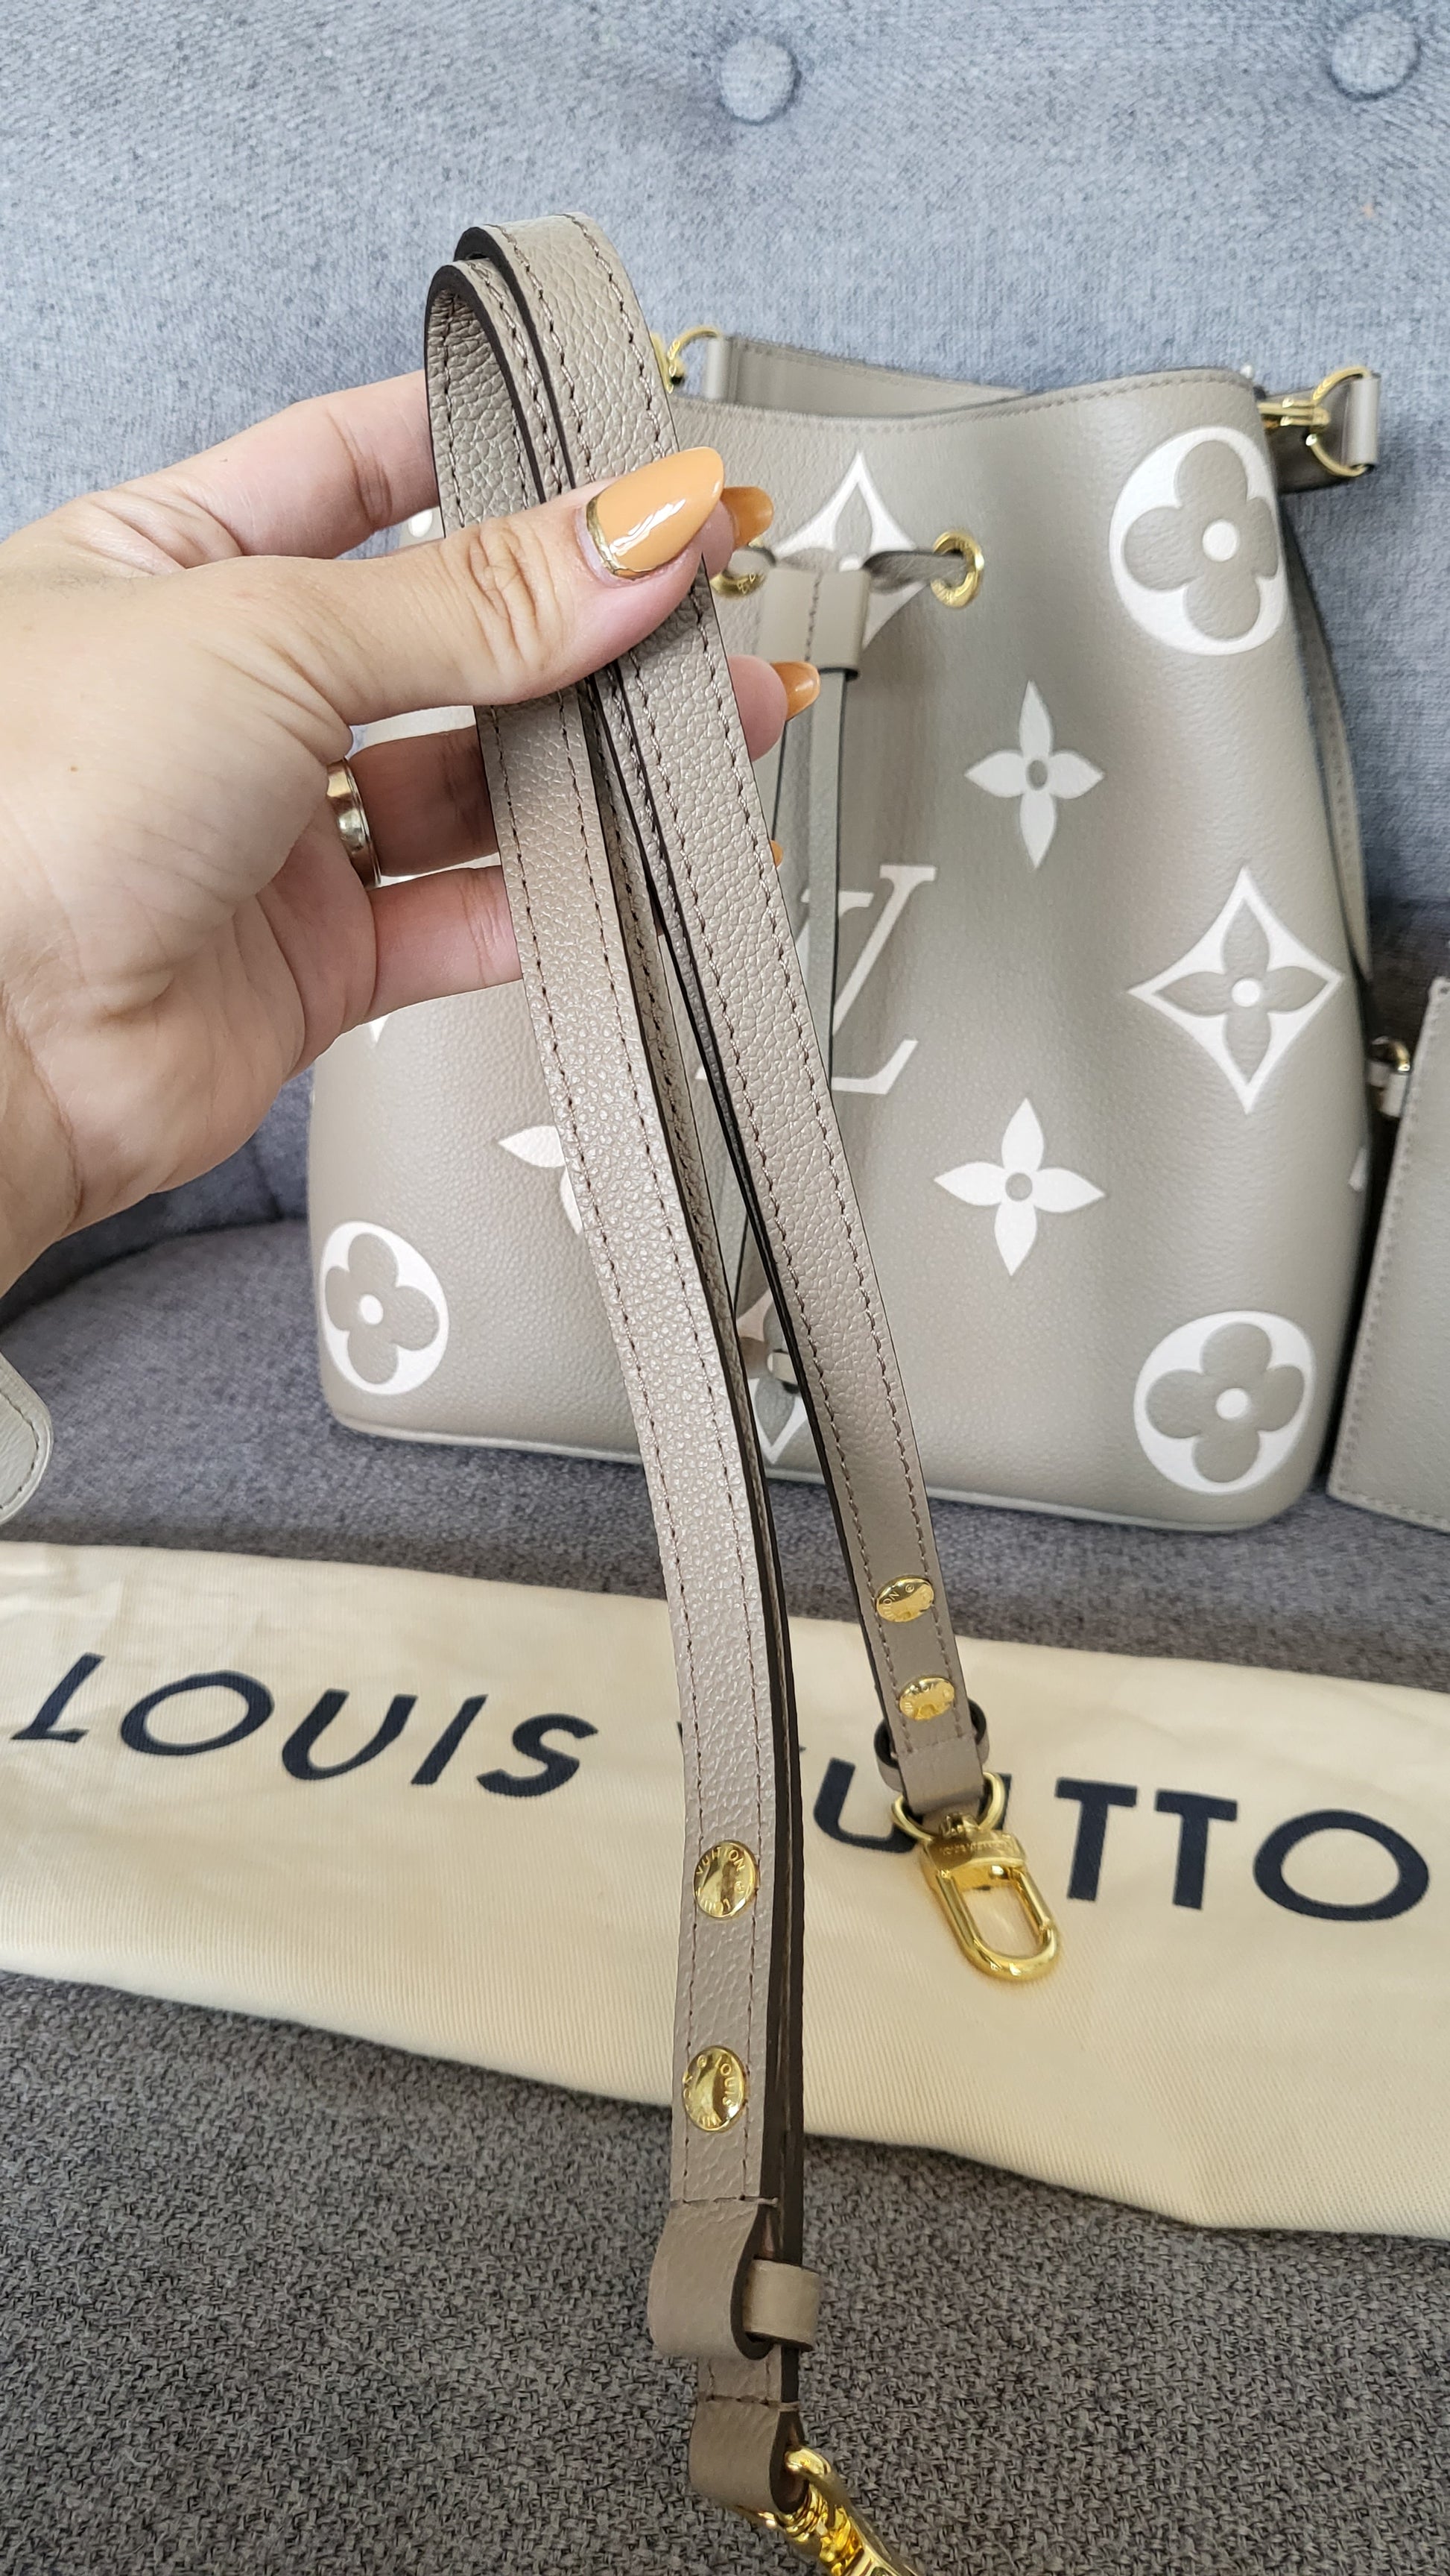 Louis Vuitton Turtledove NeoNoe mm M45555 by The-Collectory